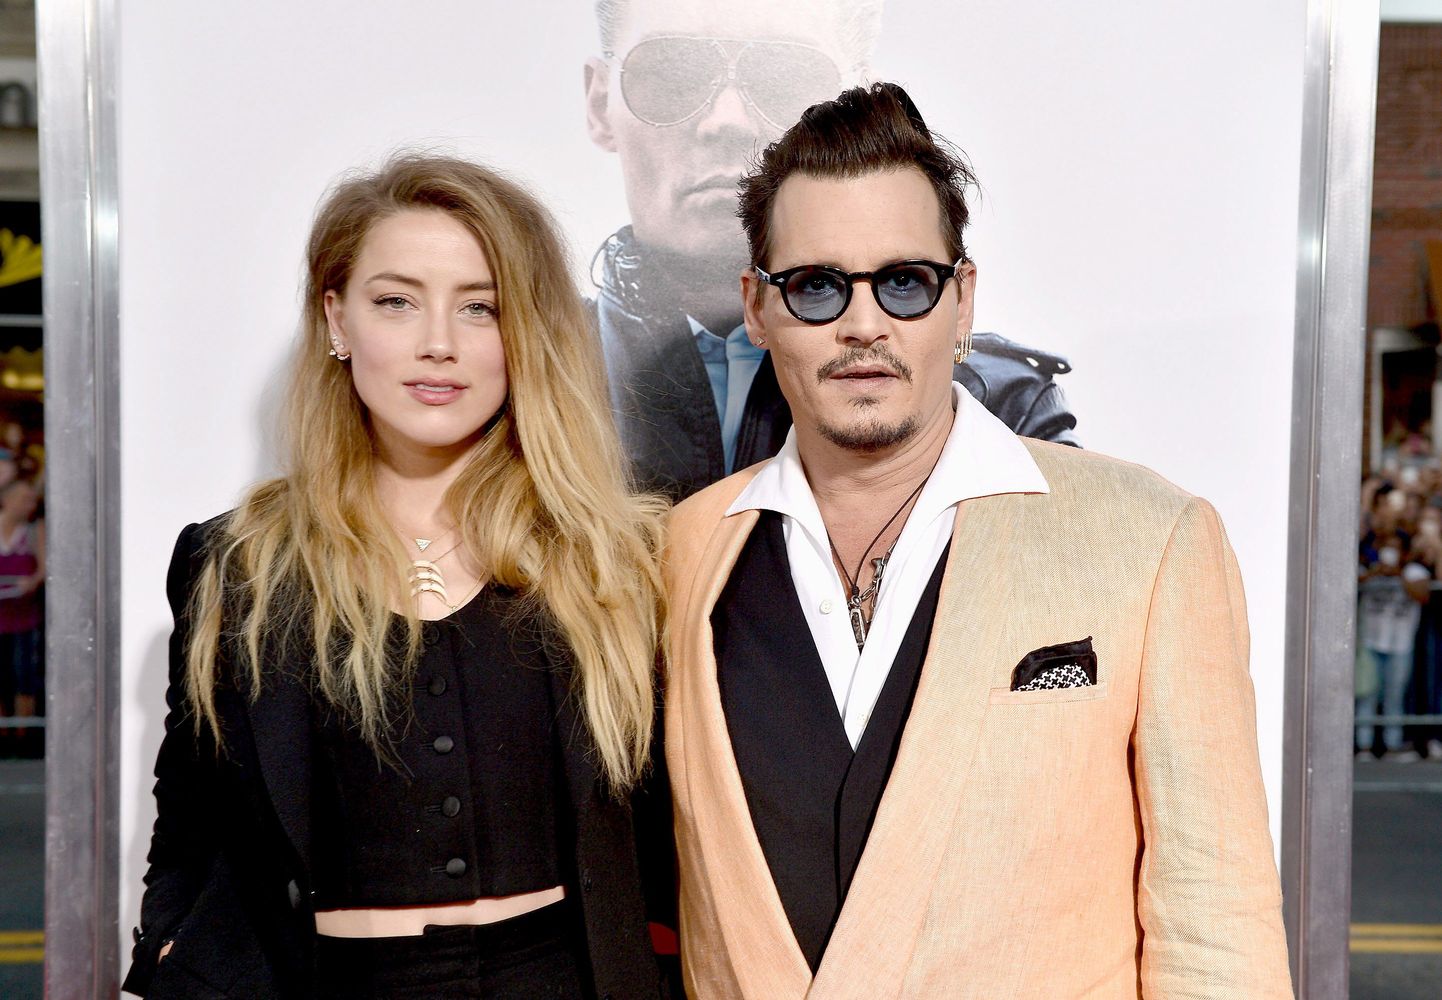 BOSTON, MA - SEPTEMBER 15: Actors Amber Heard (L) and Johnny Depp attend the "Black Mass" Boston special screening at the Coolidge Corner Theatre on September 15, 2015 in Boston, Massachusetts.   Paul Marotta/Getty Images for Warner Brothers/AFP
== FOR NEWSPAPERS, INTERNET, TELCOS & TELEVISION USE ONLY ==